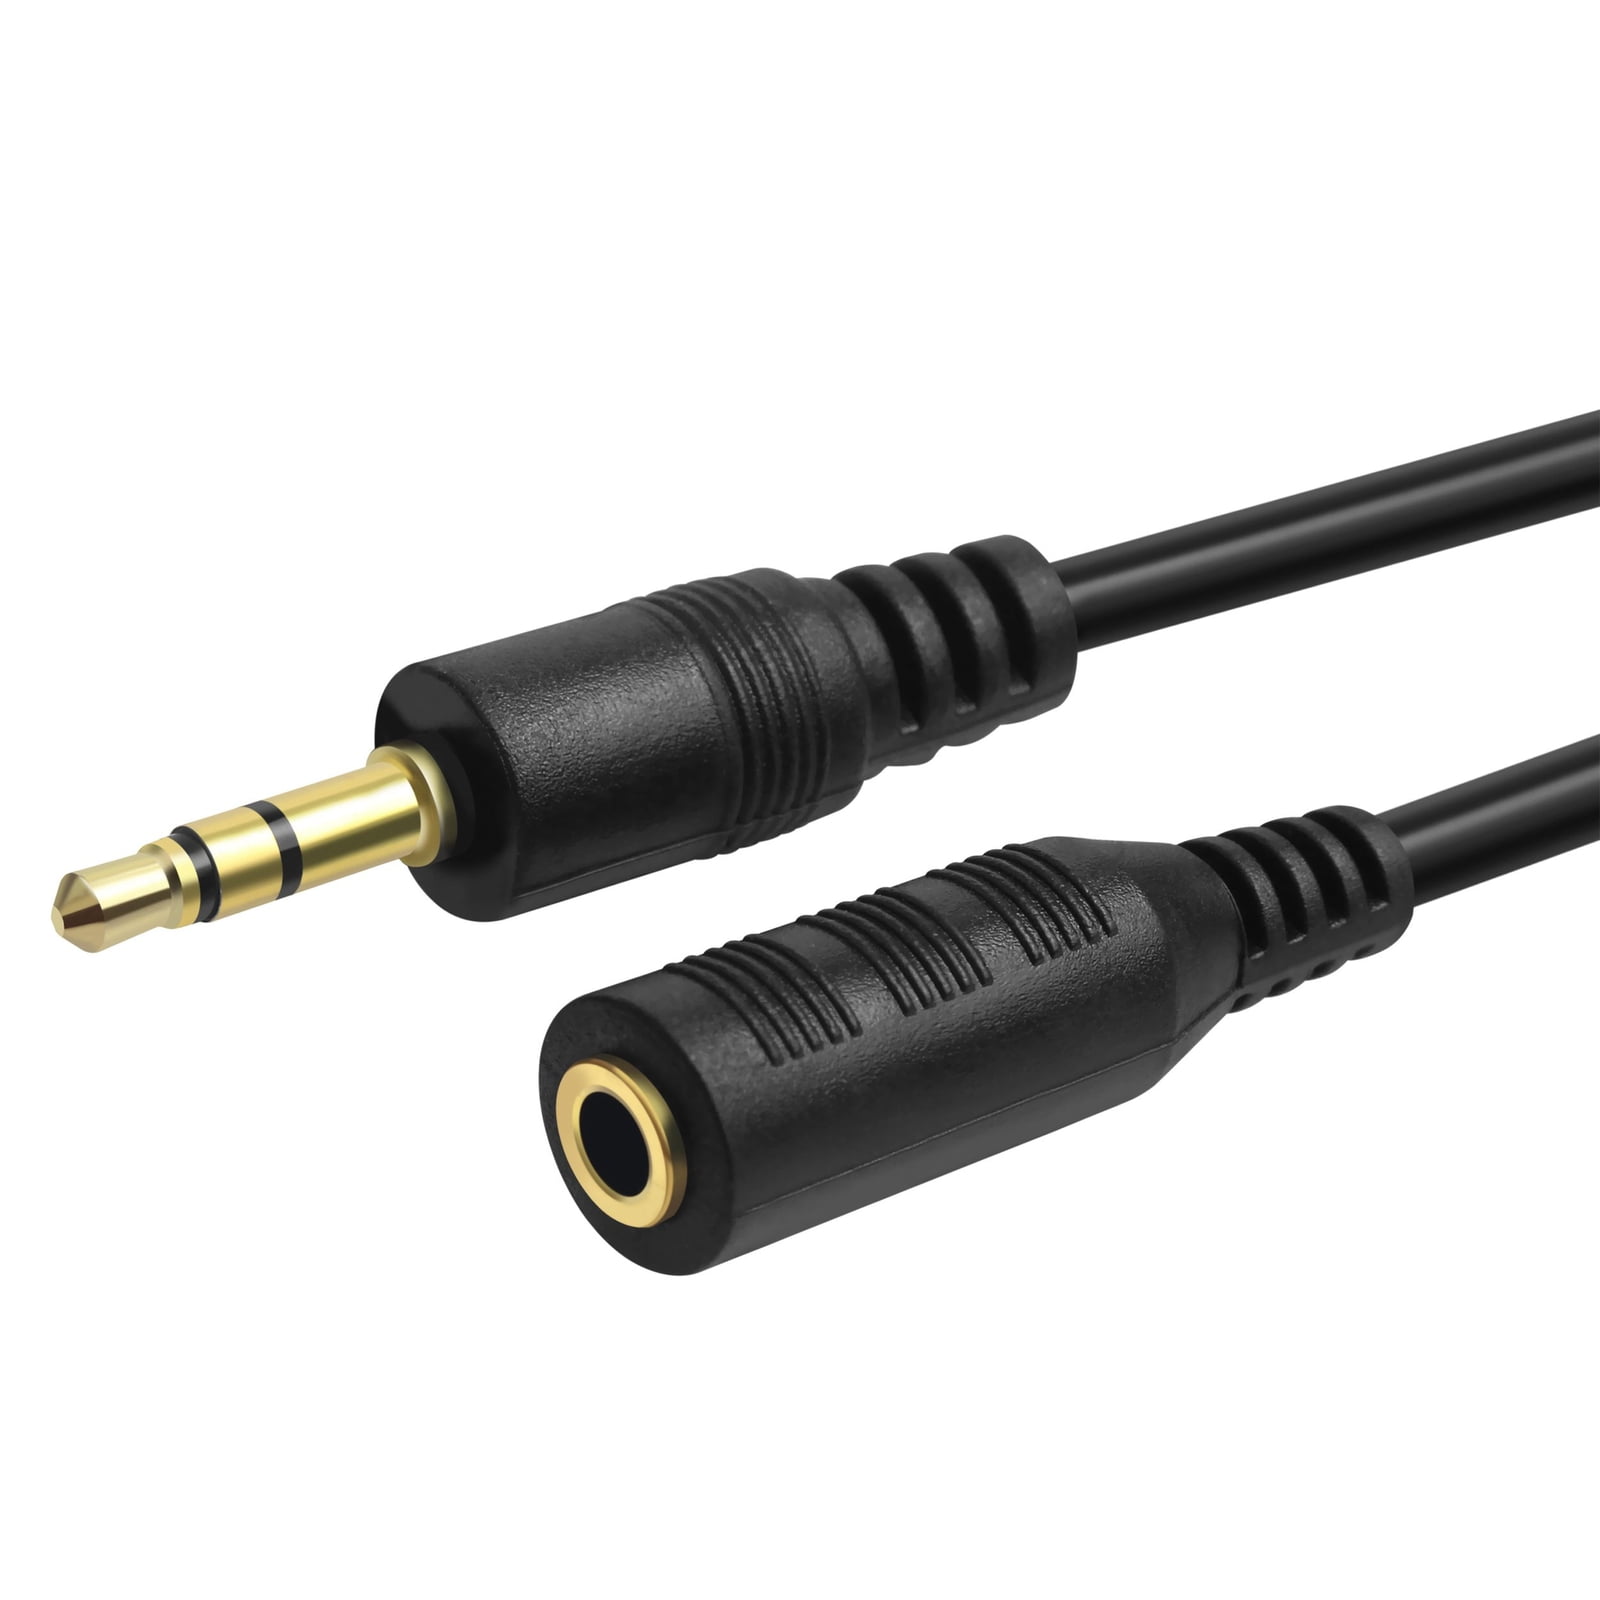 3.5mm 1/8" audio computer speaker extension extended cable male to female M-F 